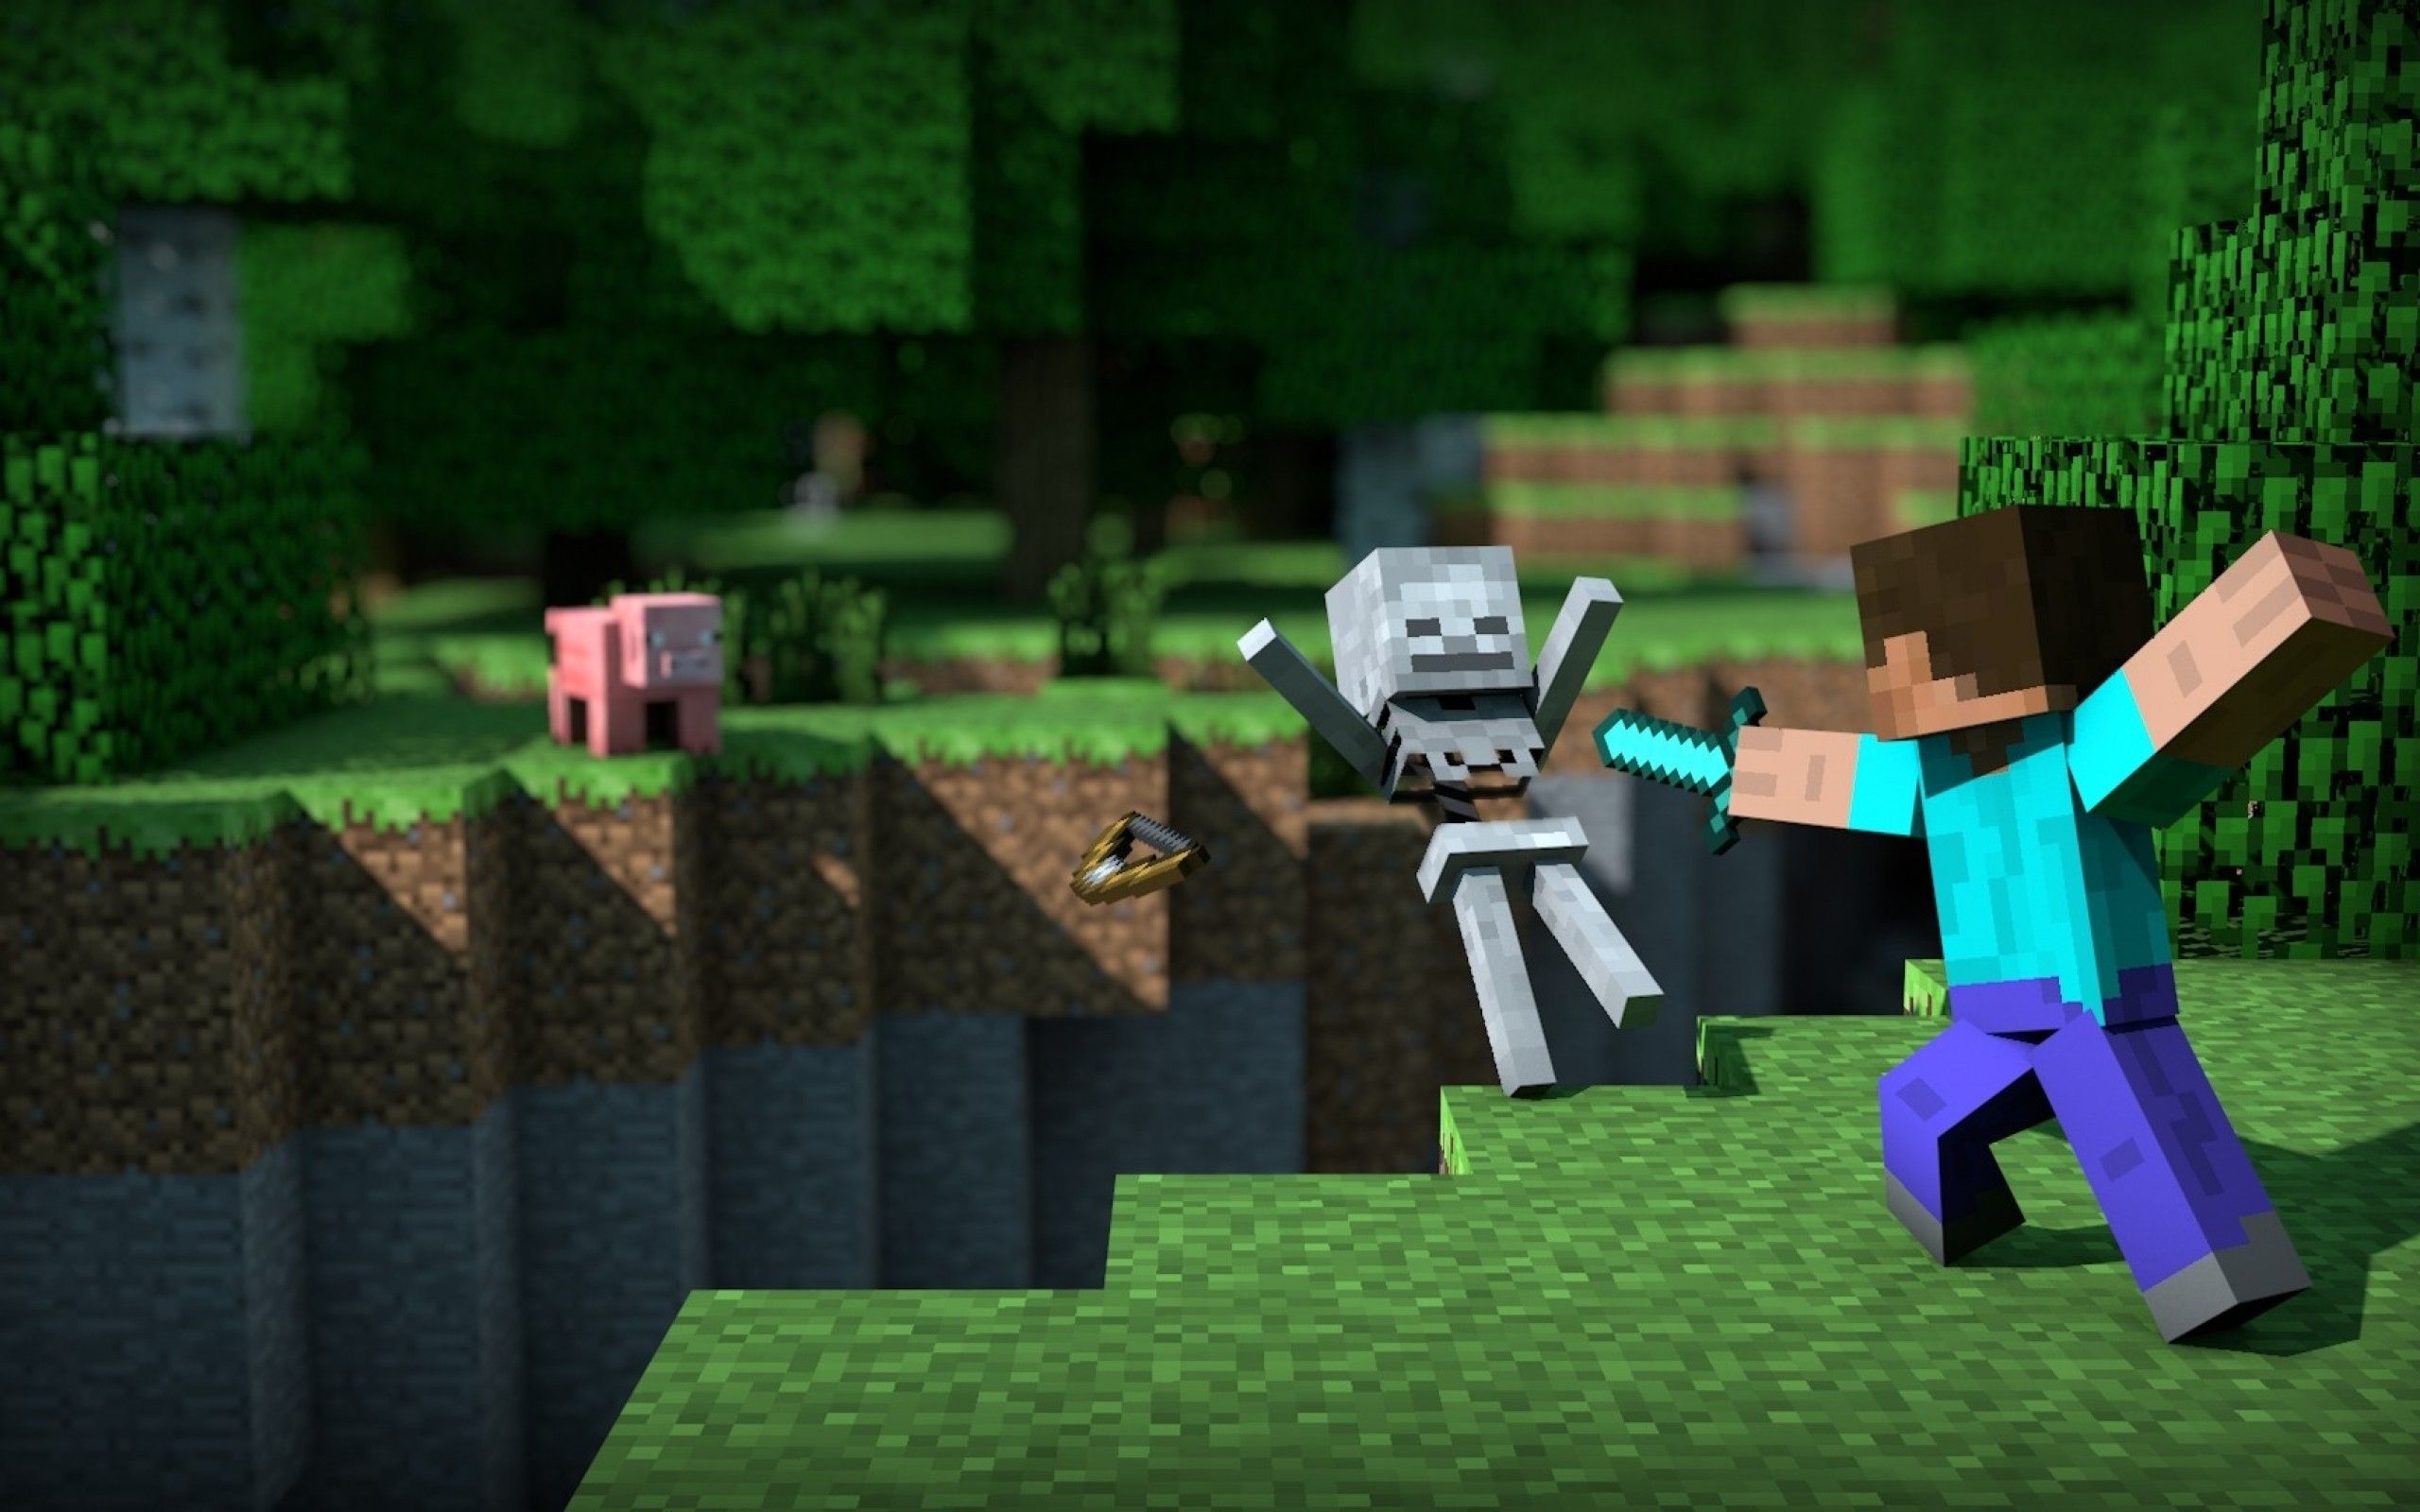 video games skeletons minecraft pigs mexican 2560x1600 wallpaper High Quality Wallpaper, High Definition Wallpaper